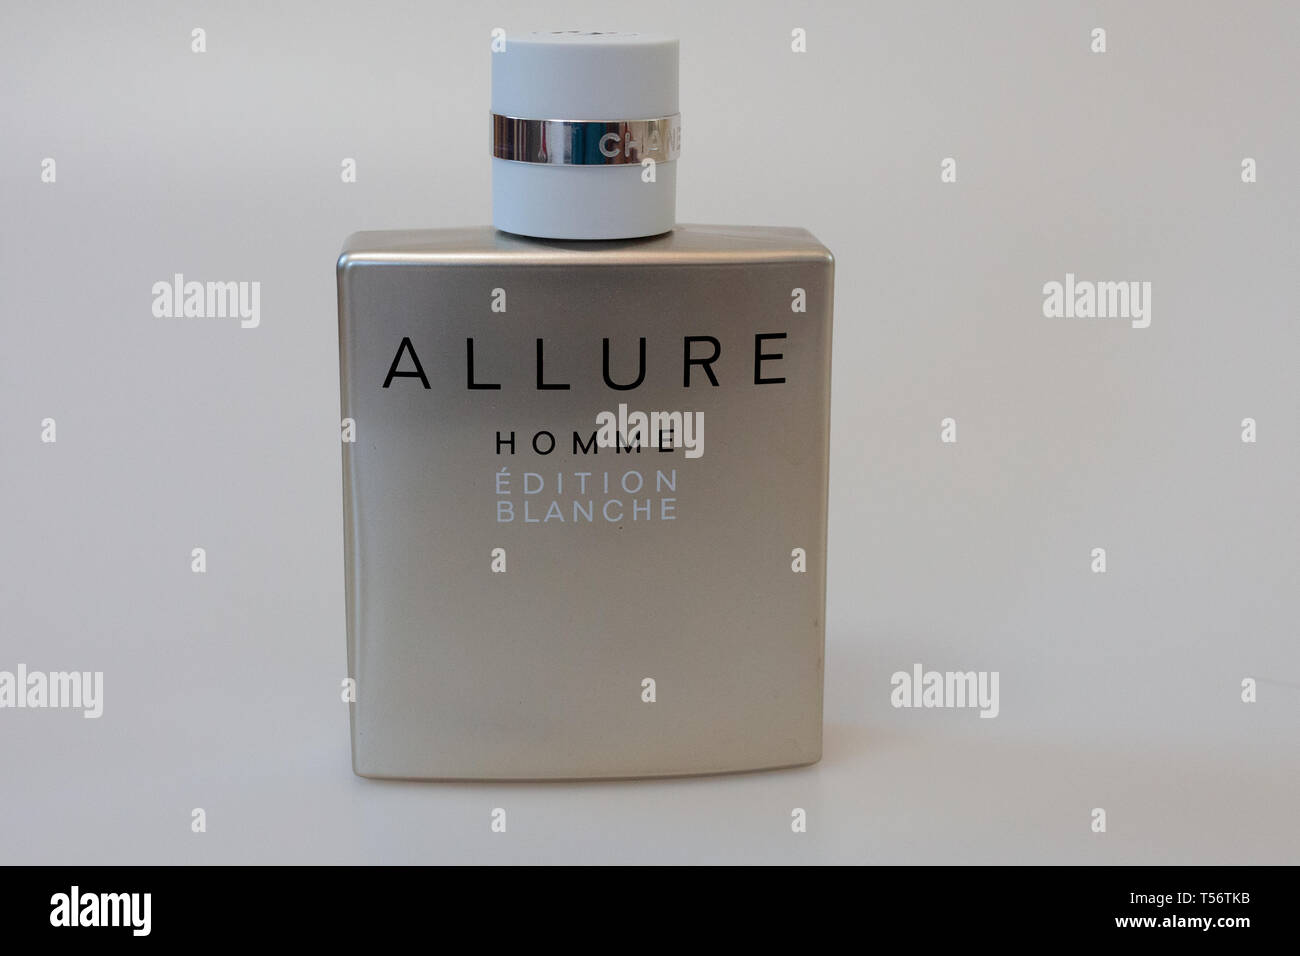 Allure Homme Edition Blanche Stock Photo - Alamy